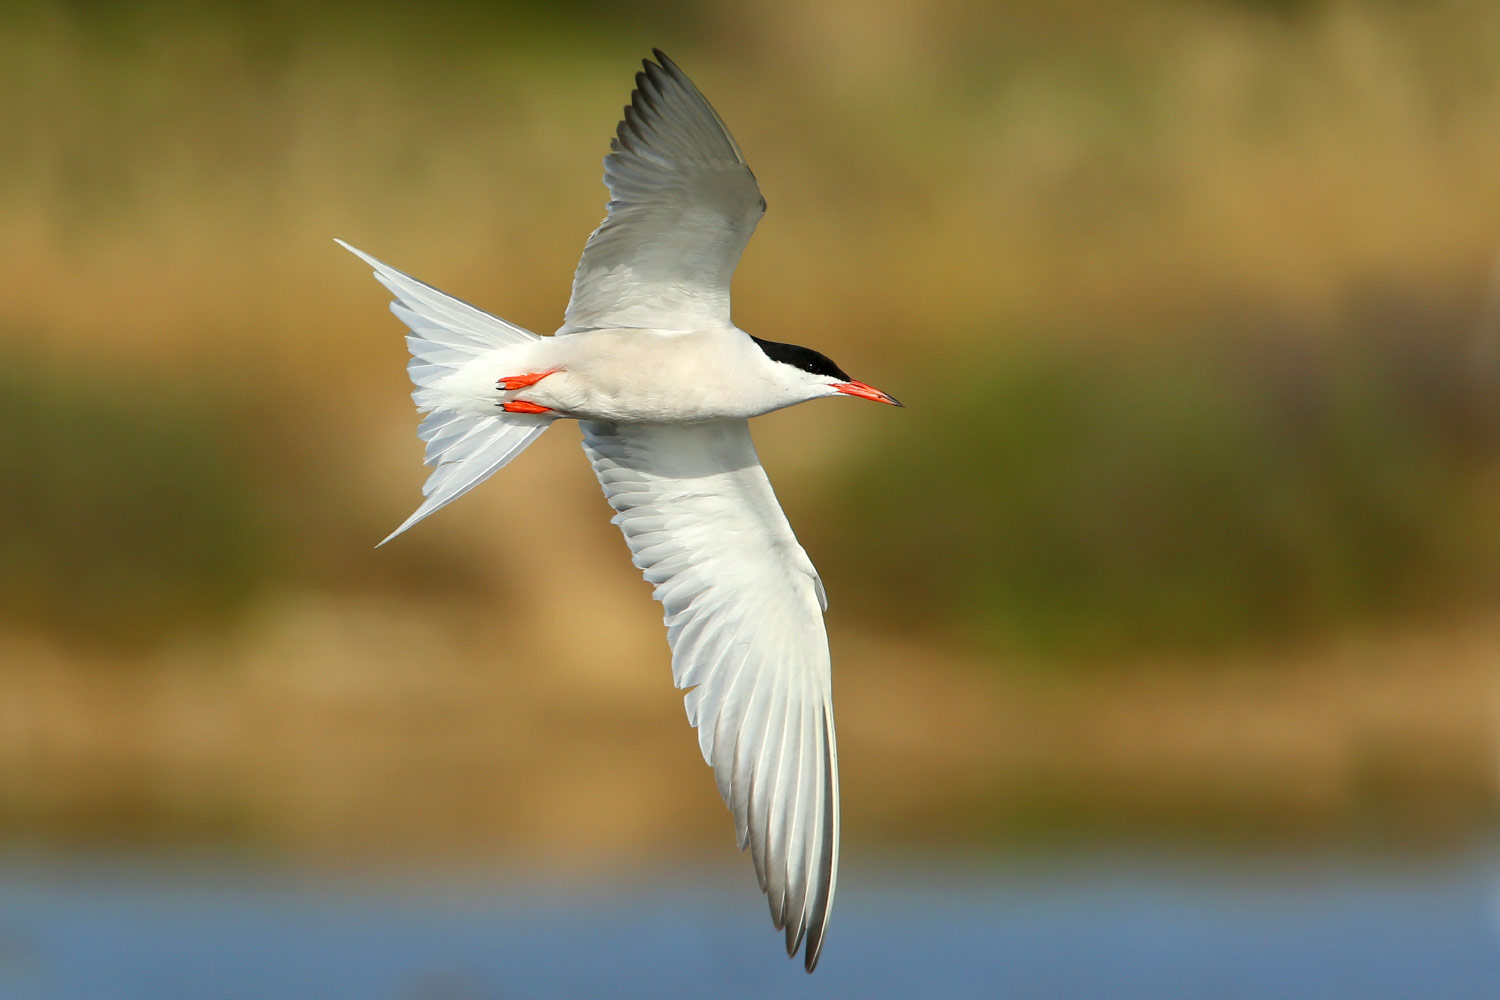 Common, Arctic and Roseate Tern photo ID guide - BirdGuides